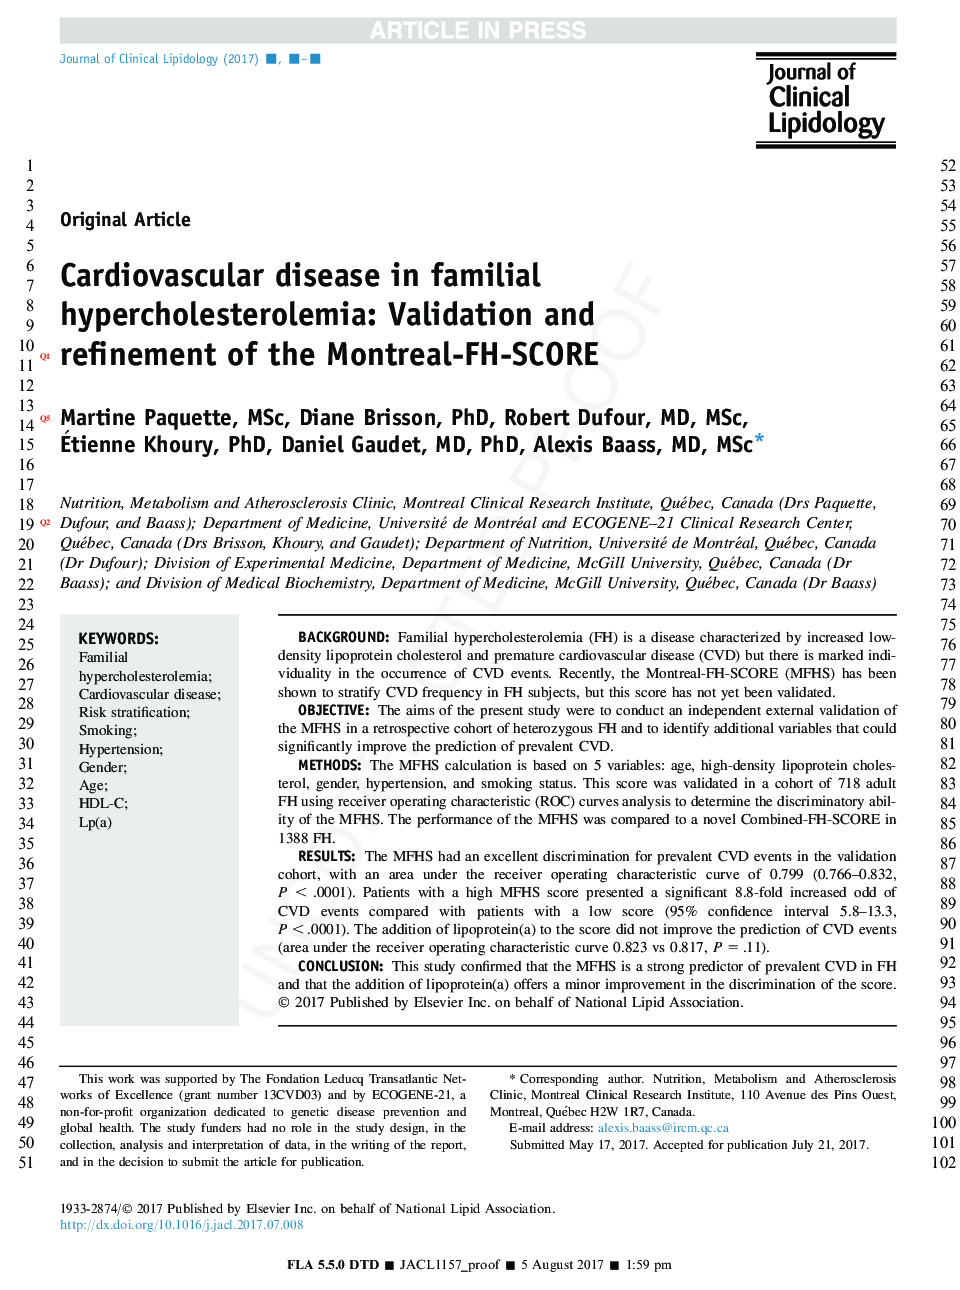 Cardiovascular disease in familial hypercholesterolemia: Validation and refinement of the Montreal-FH-SCORE